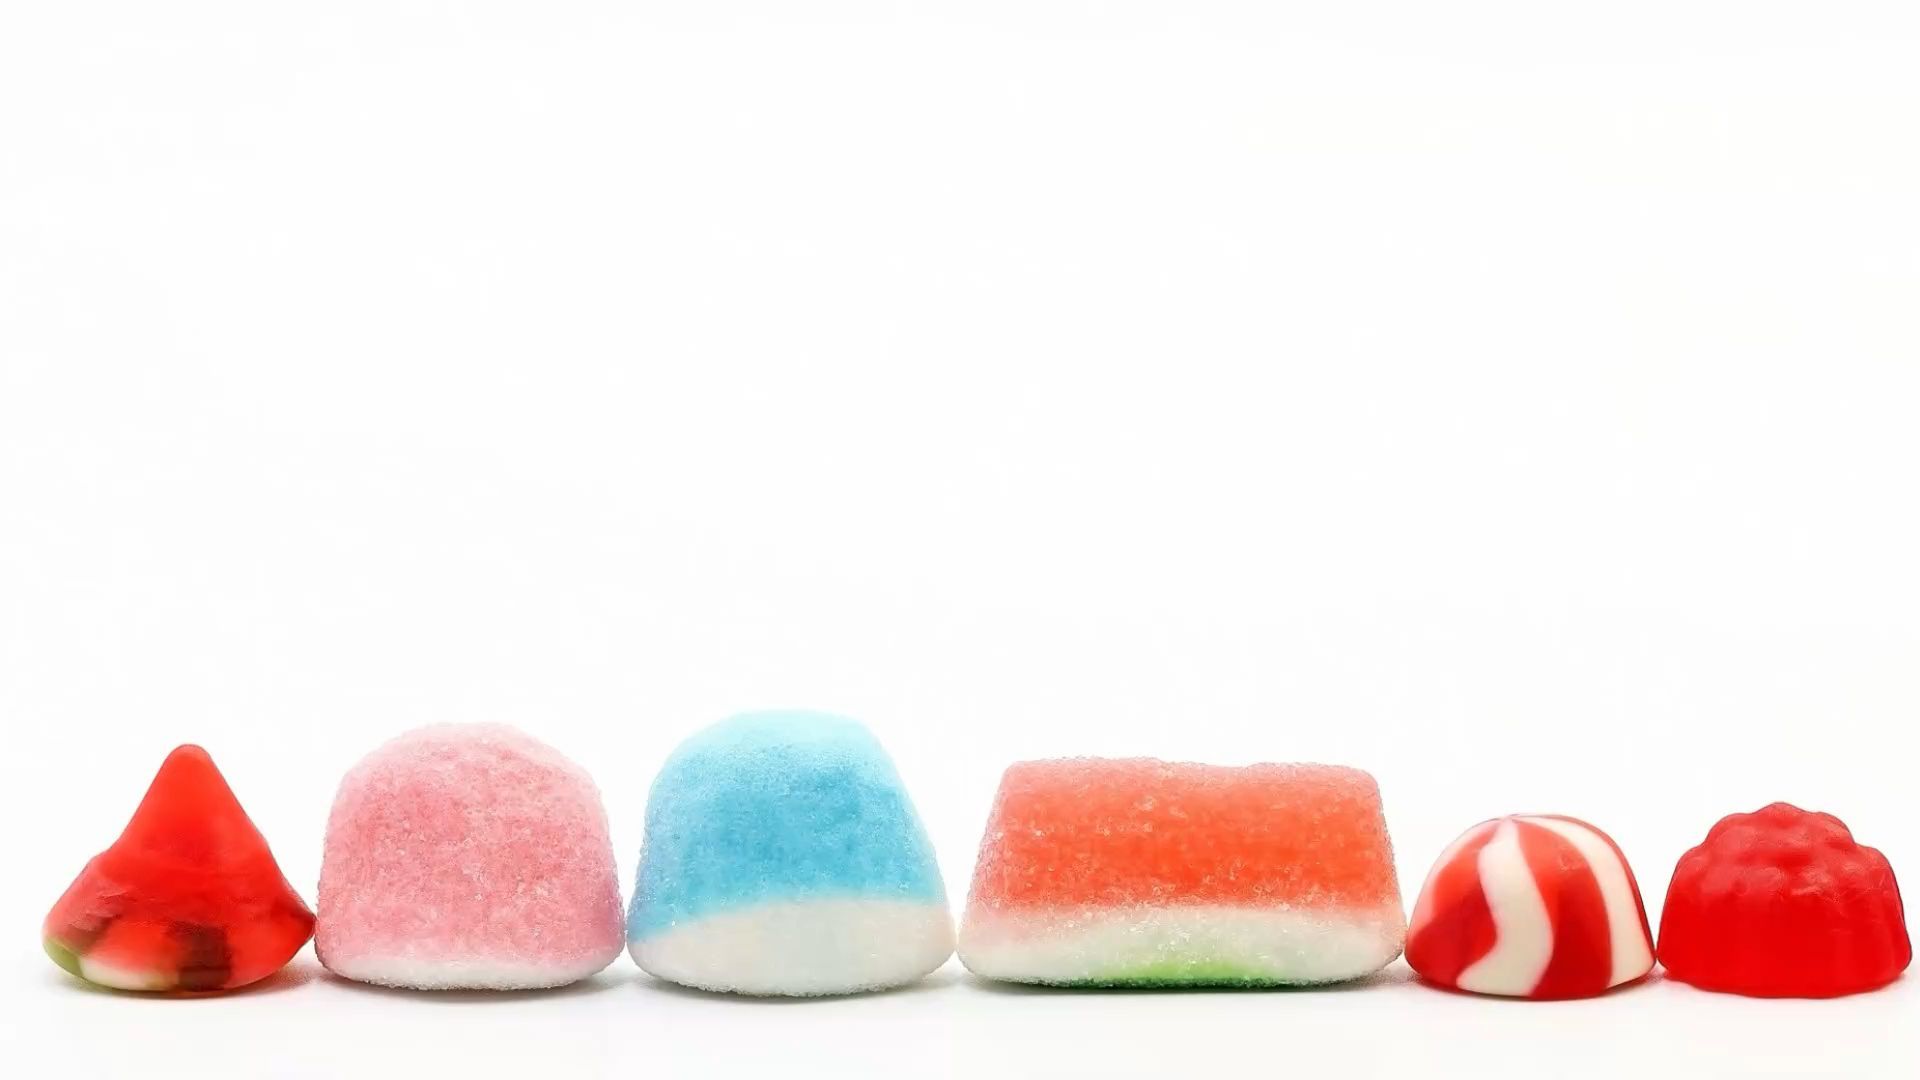 Signs of too much sugar: 8 signs that you should reconsider your sweet tooth